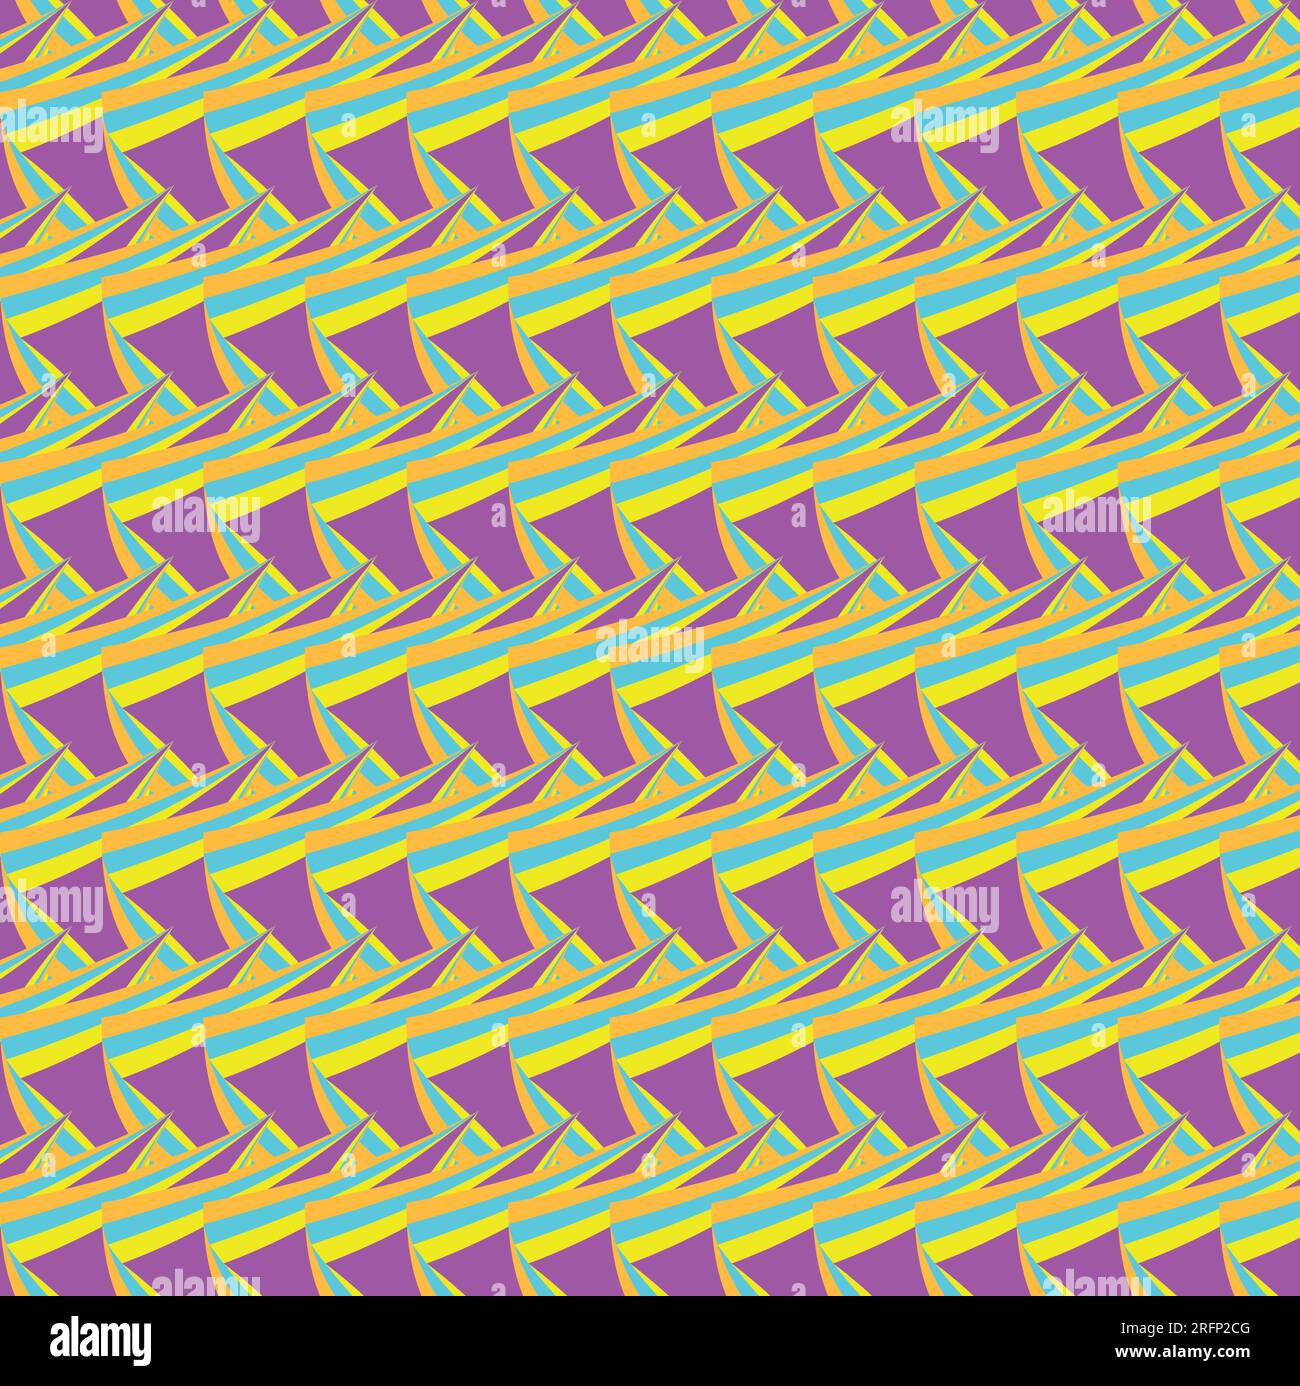 Retro seamless pattern with wave. Can be used for wallpaper, web page background, wrapping paper, print on fabric. Stock Vector